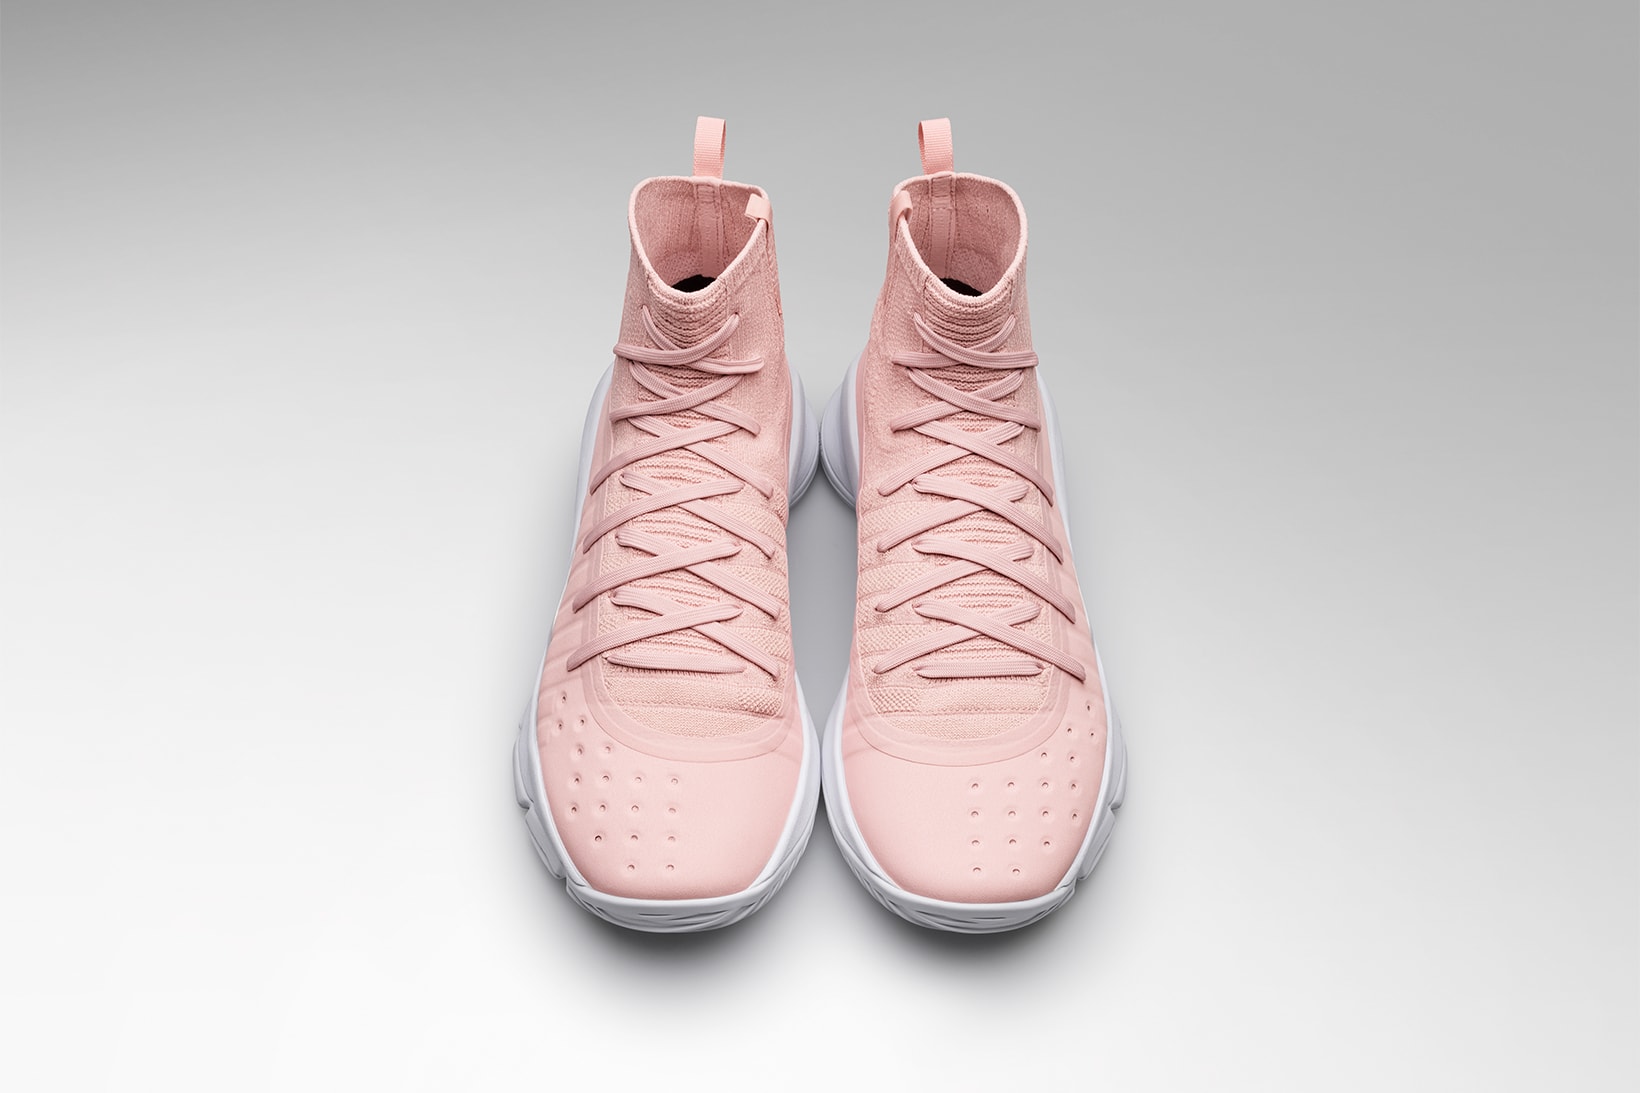 Under Armour Curry 4 Flushed Pink for Valentine's Day